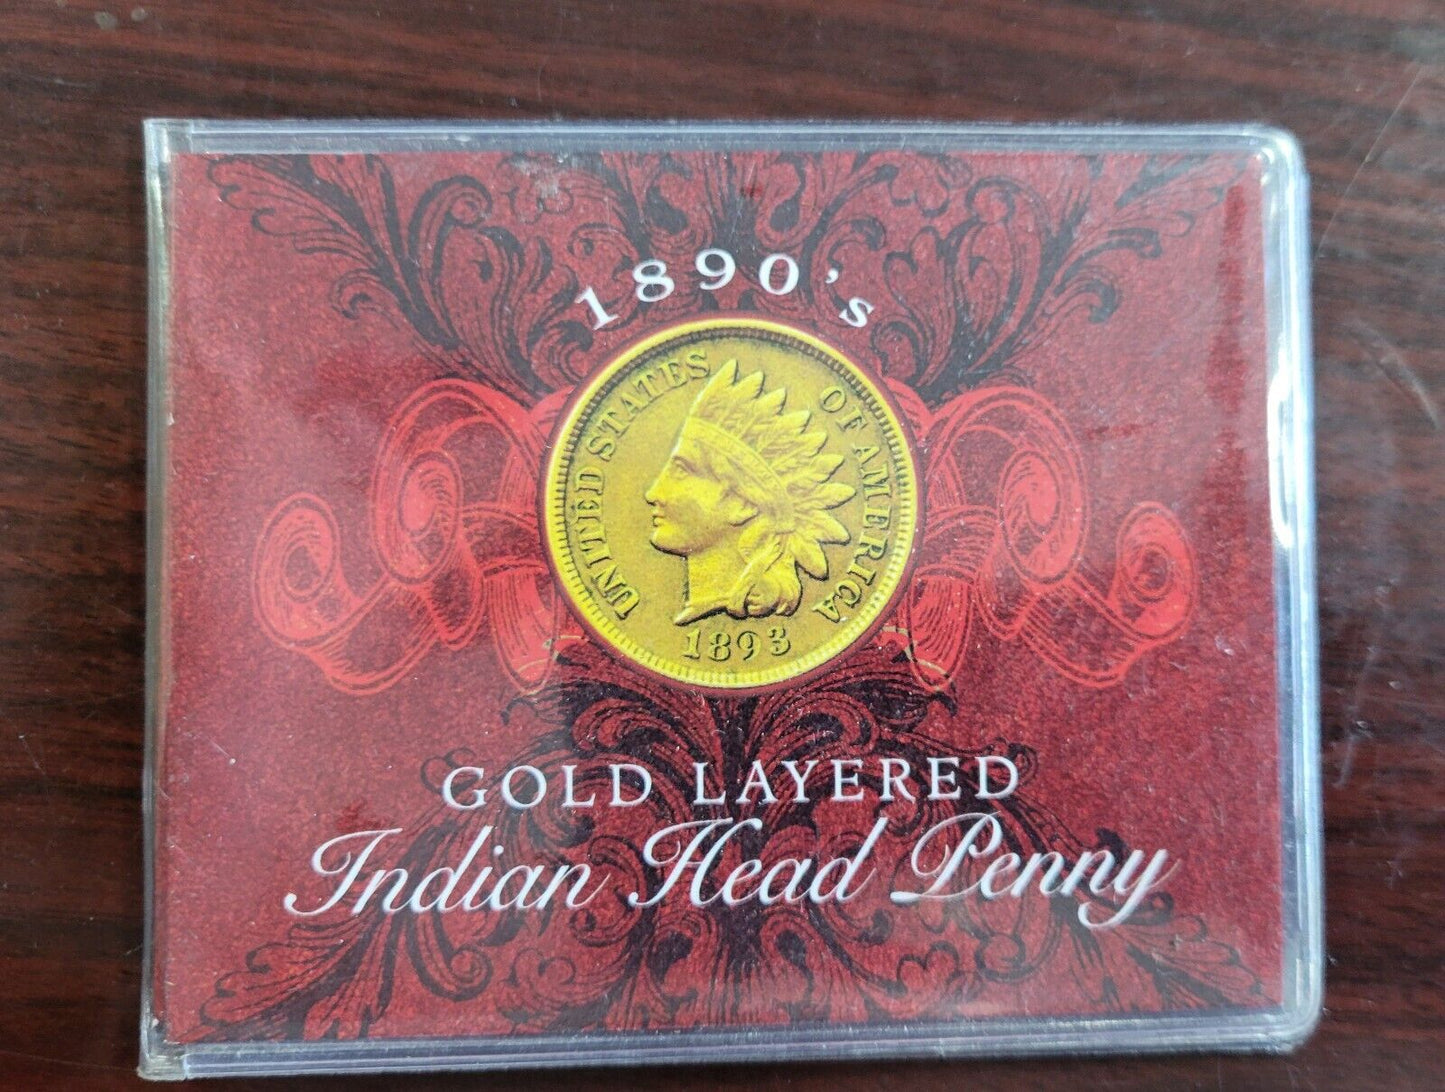 1896 Indian Head Penny Gold Layered From The 1890s Carded with COA